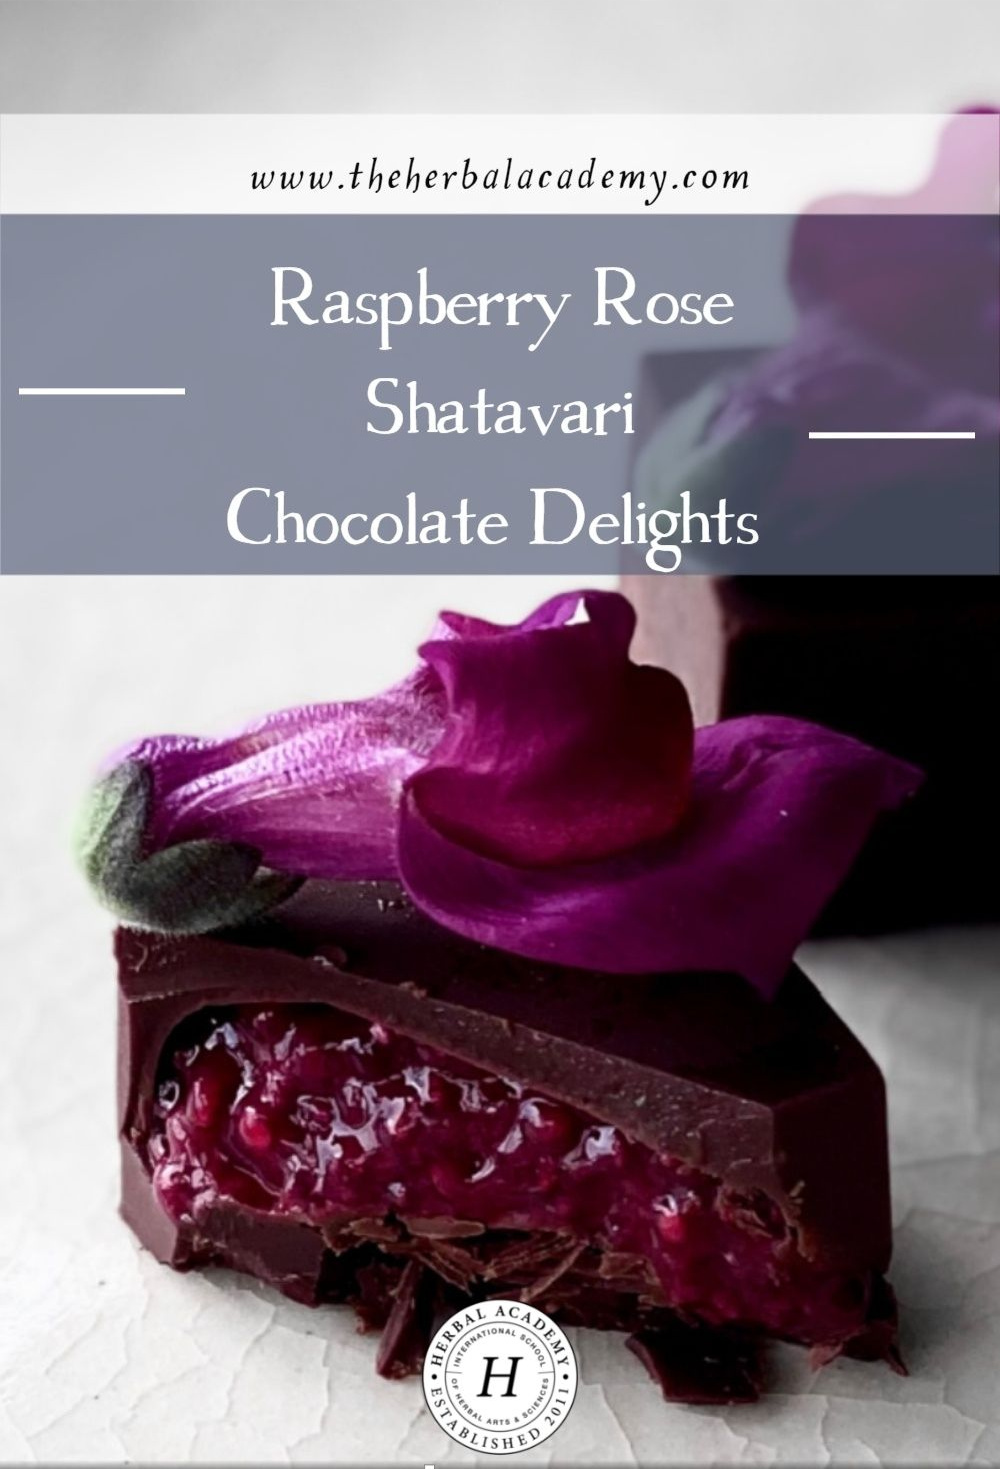 Raspberry Rose Shatavari Chocolate Delights | Herbal Academy | Today we are sharing a recipe for Raspberry Rose Shatavari Chocolate Delights - a perfect treat for Valentine's Day or any day of the year.